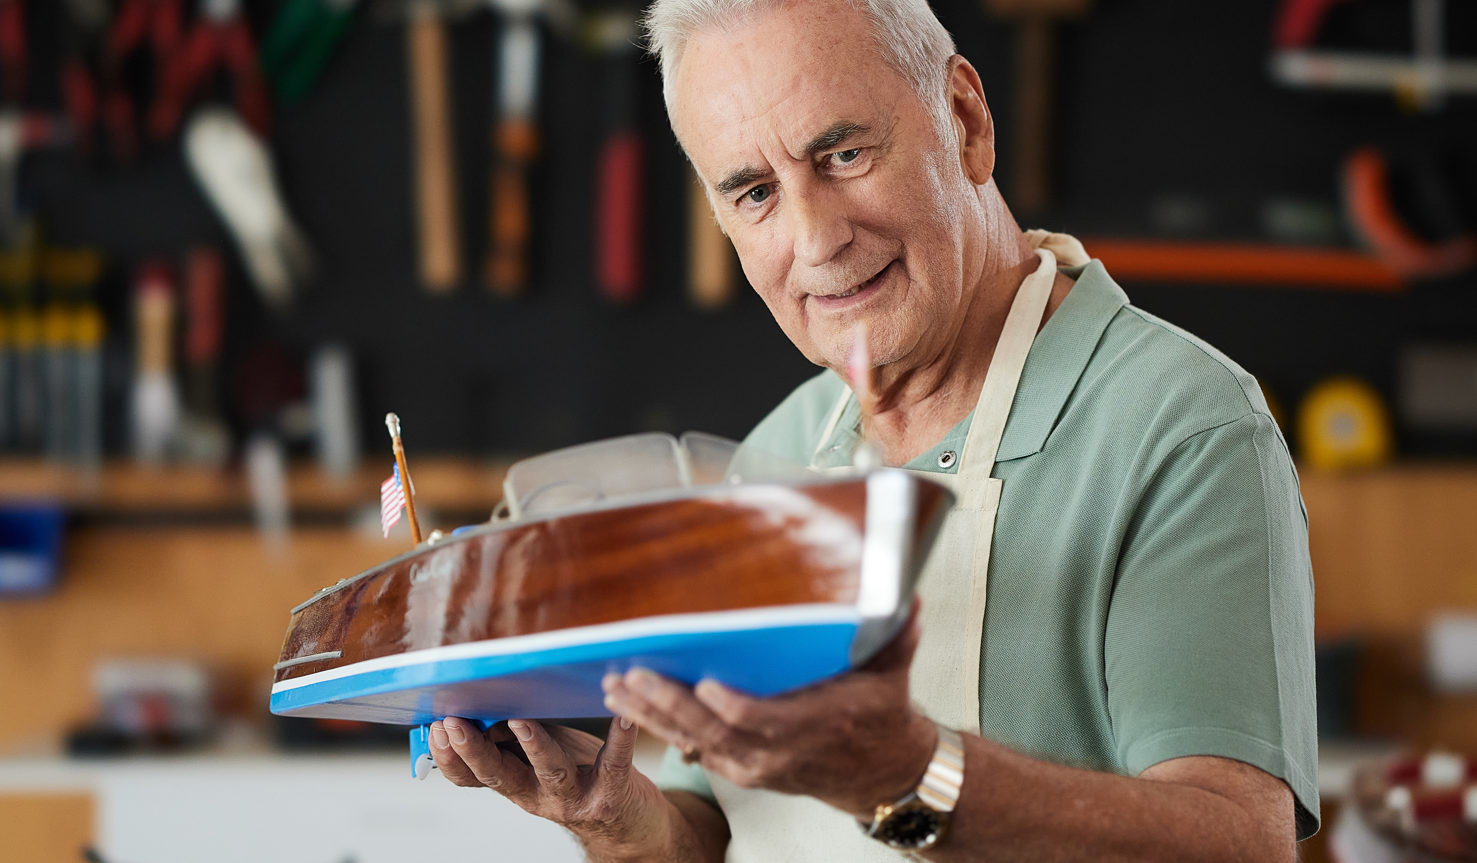 A man in his sixties hold a timber model boat whilst wearing a cream apron and green polo shirt in a wood work shop.